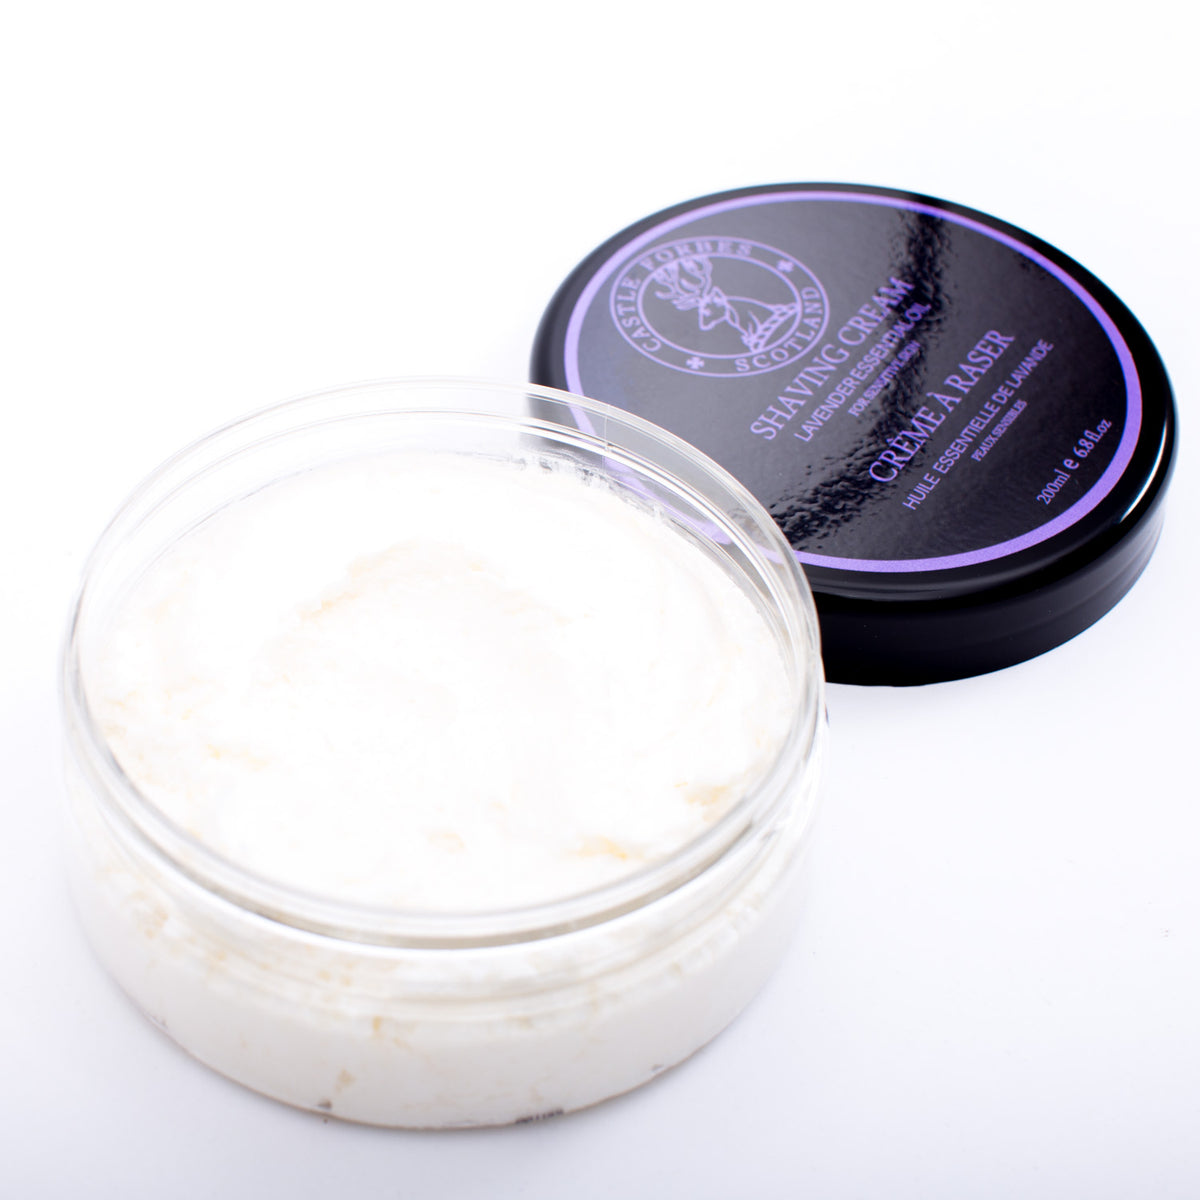 A luxurious jar of Castle Forbes Lavender Essential Oil Shaving Cream with a purple lid from KirbyAllison.com.